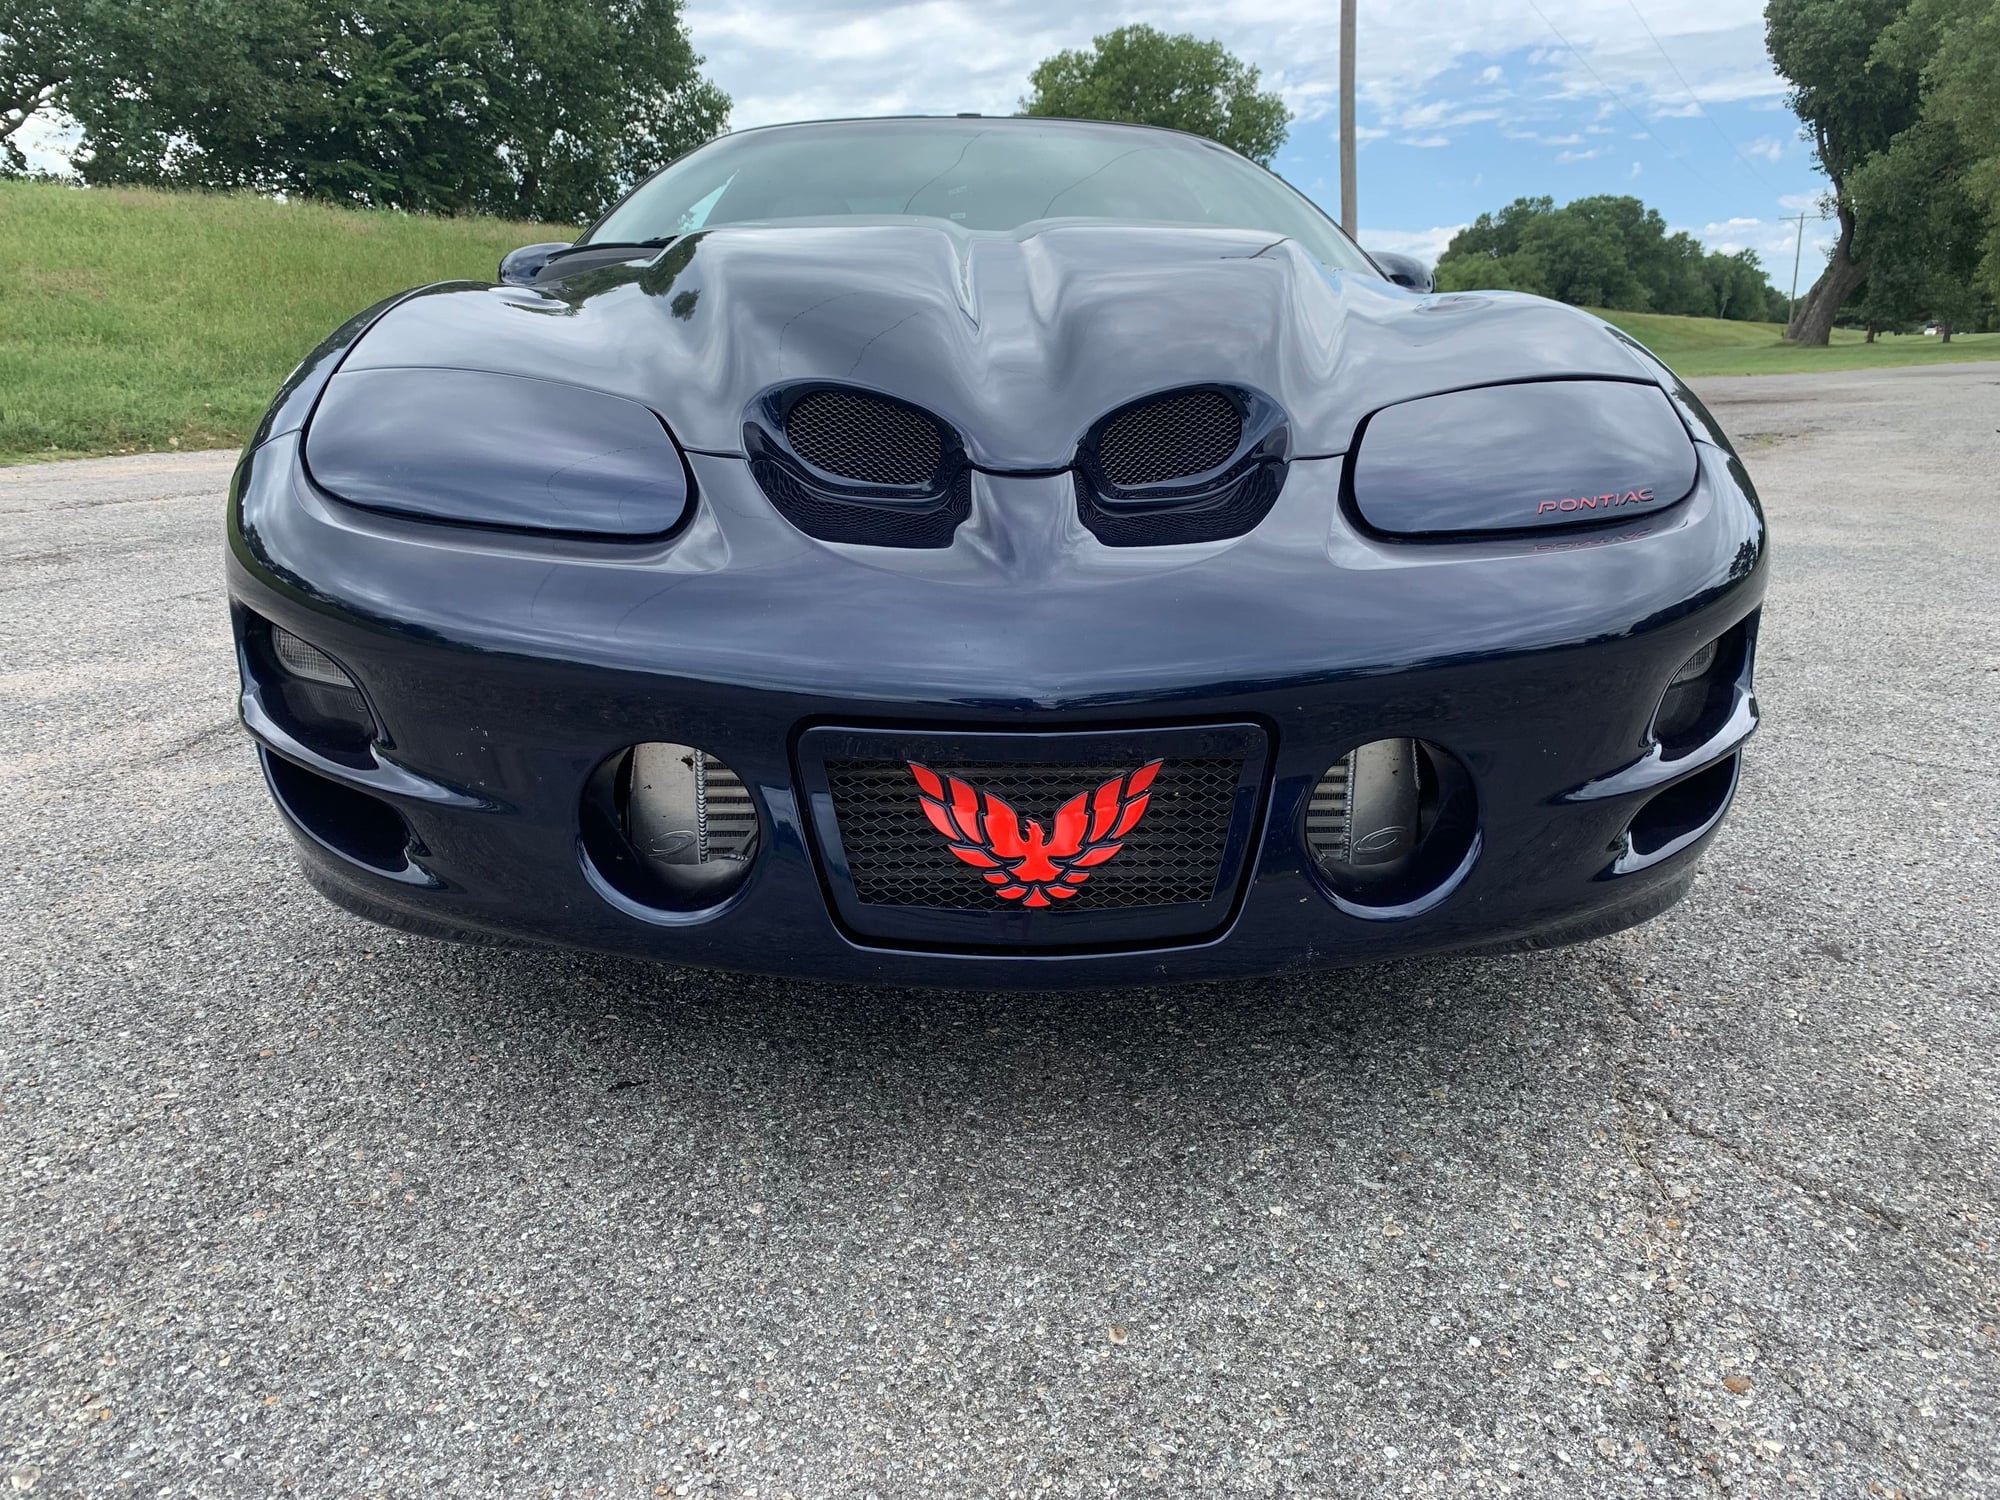 2002 Pontiac Firebird - 2002 Pontiac trans am ws6 HCI supercharged procharger low miles, forged, prc heads, - Used - VIN 2g2fv22g722158021 - 75,000 Miles - 8 cyl - 2WD - Automatic - Coupe - Blue - Hutchinson, KS 67502, United States